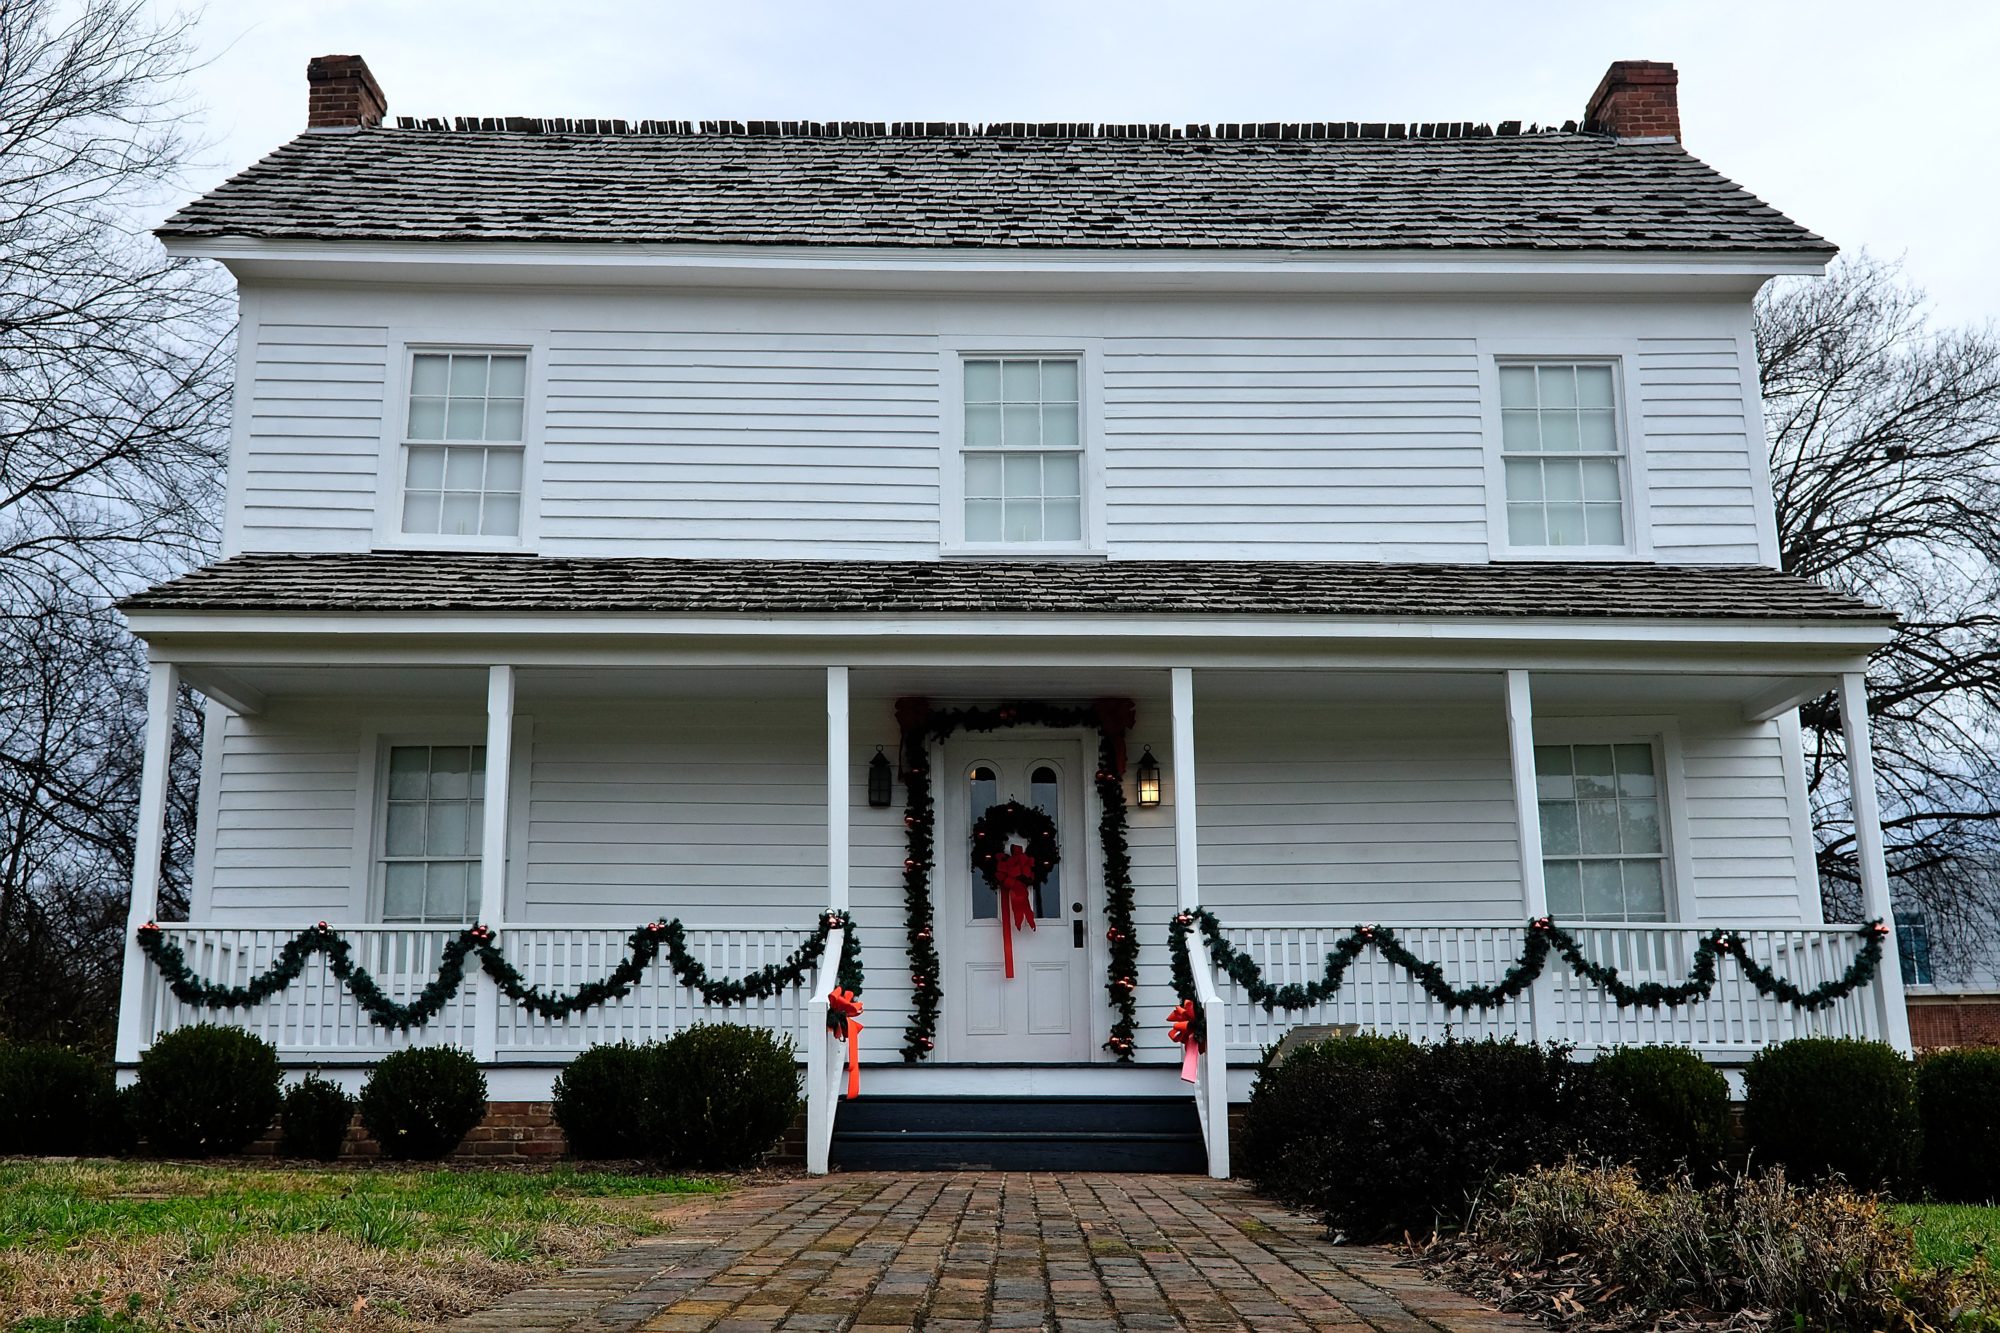 A view of the front of the Snuggs House in Albemarle